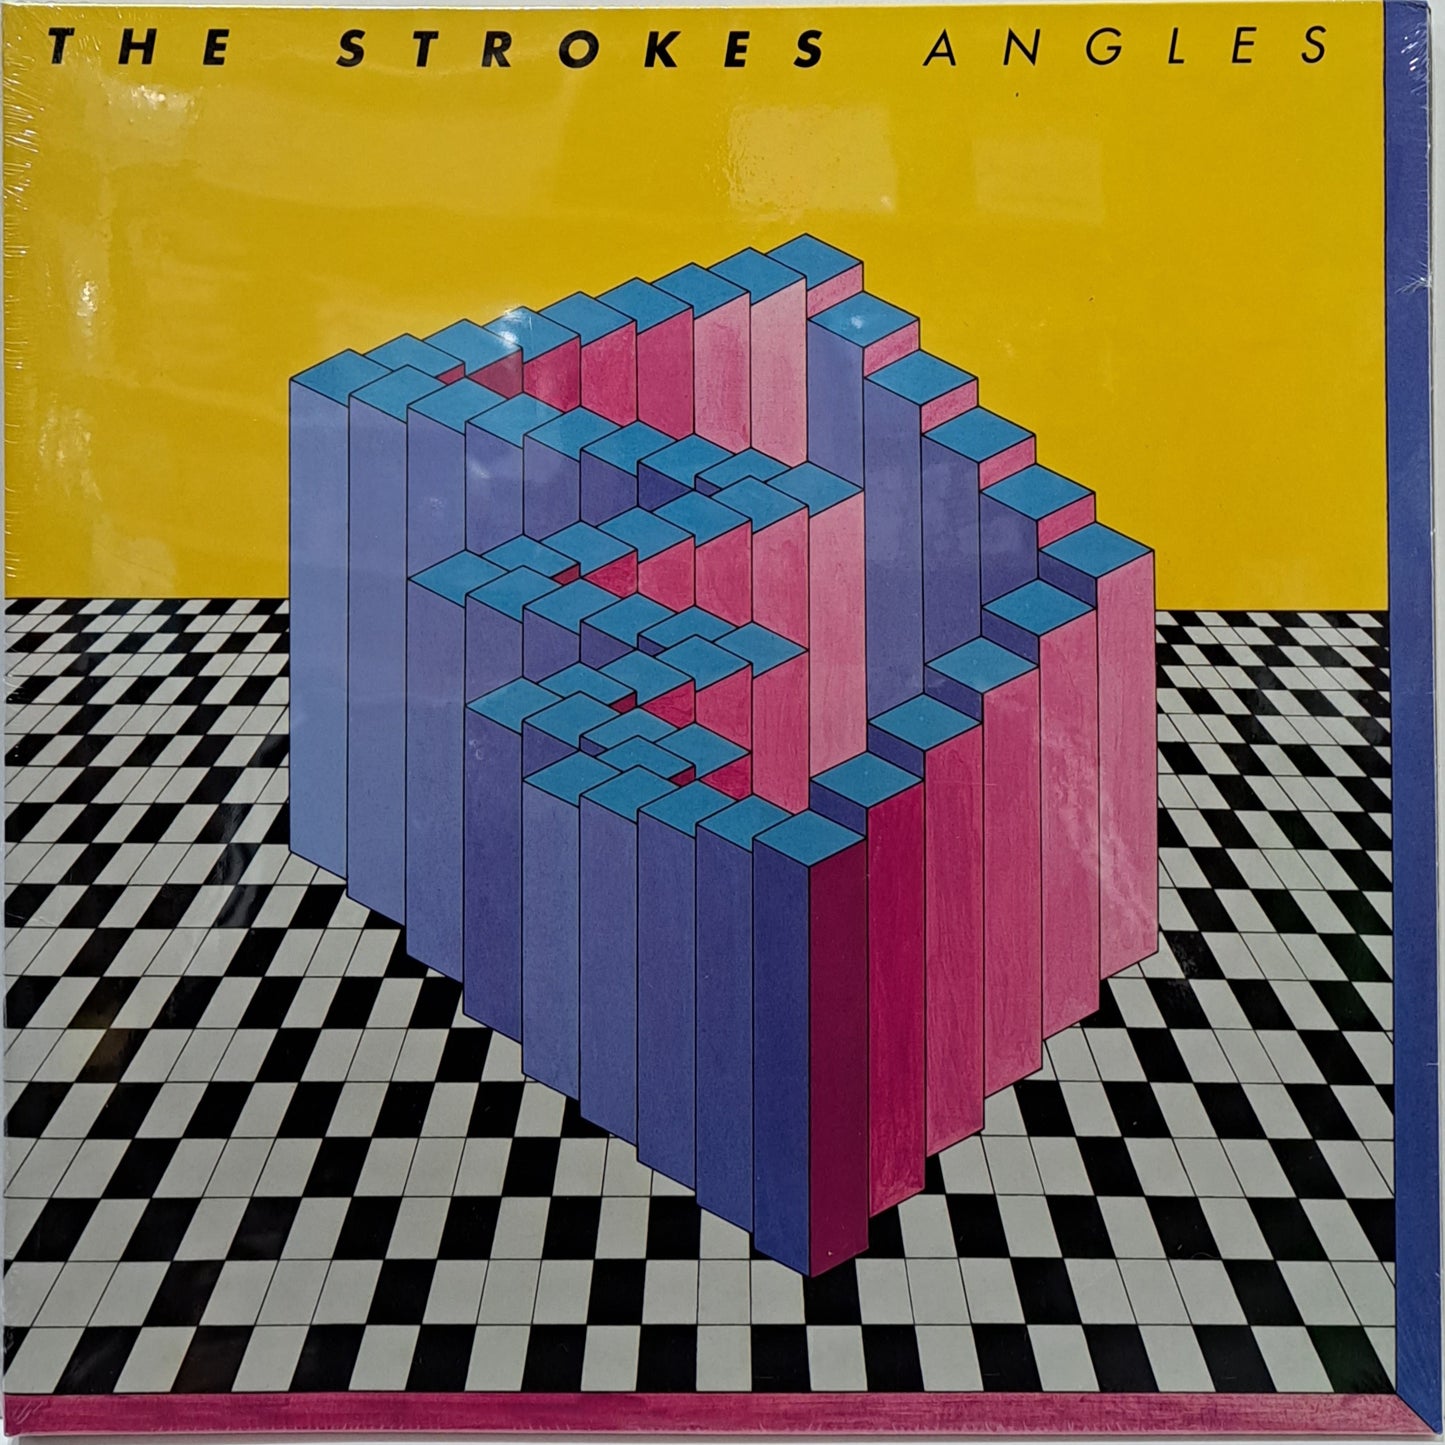 THE STROKES - ANGLES  LP